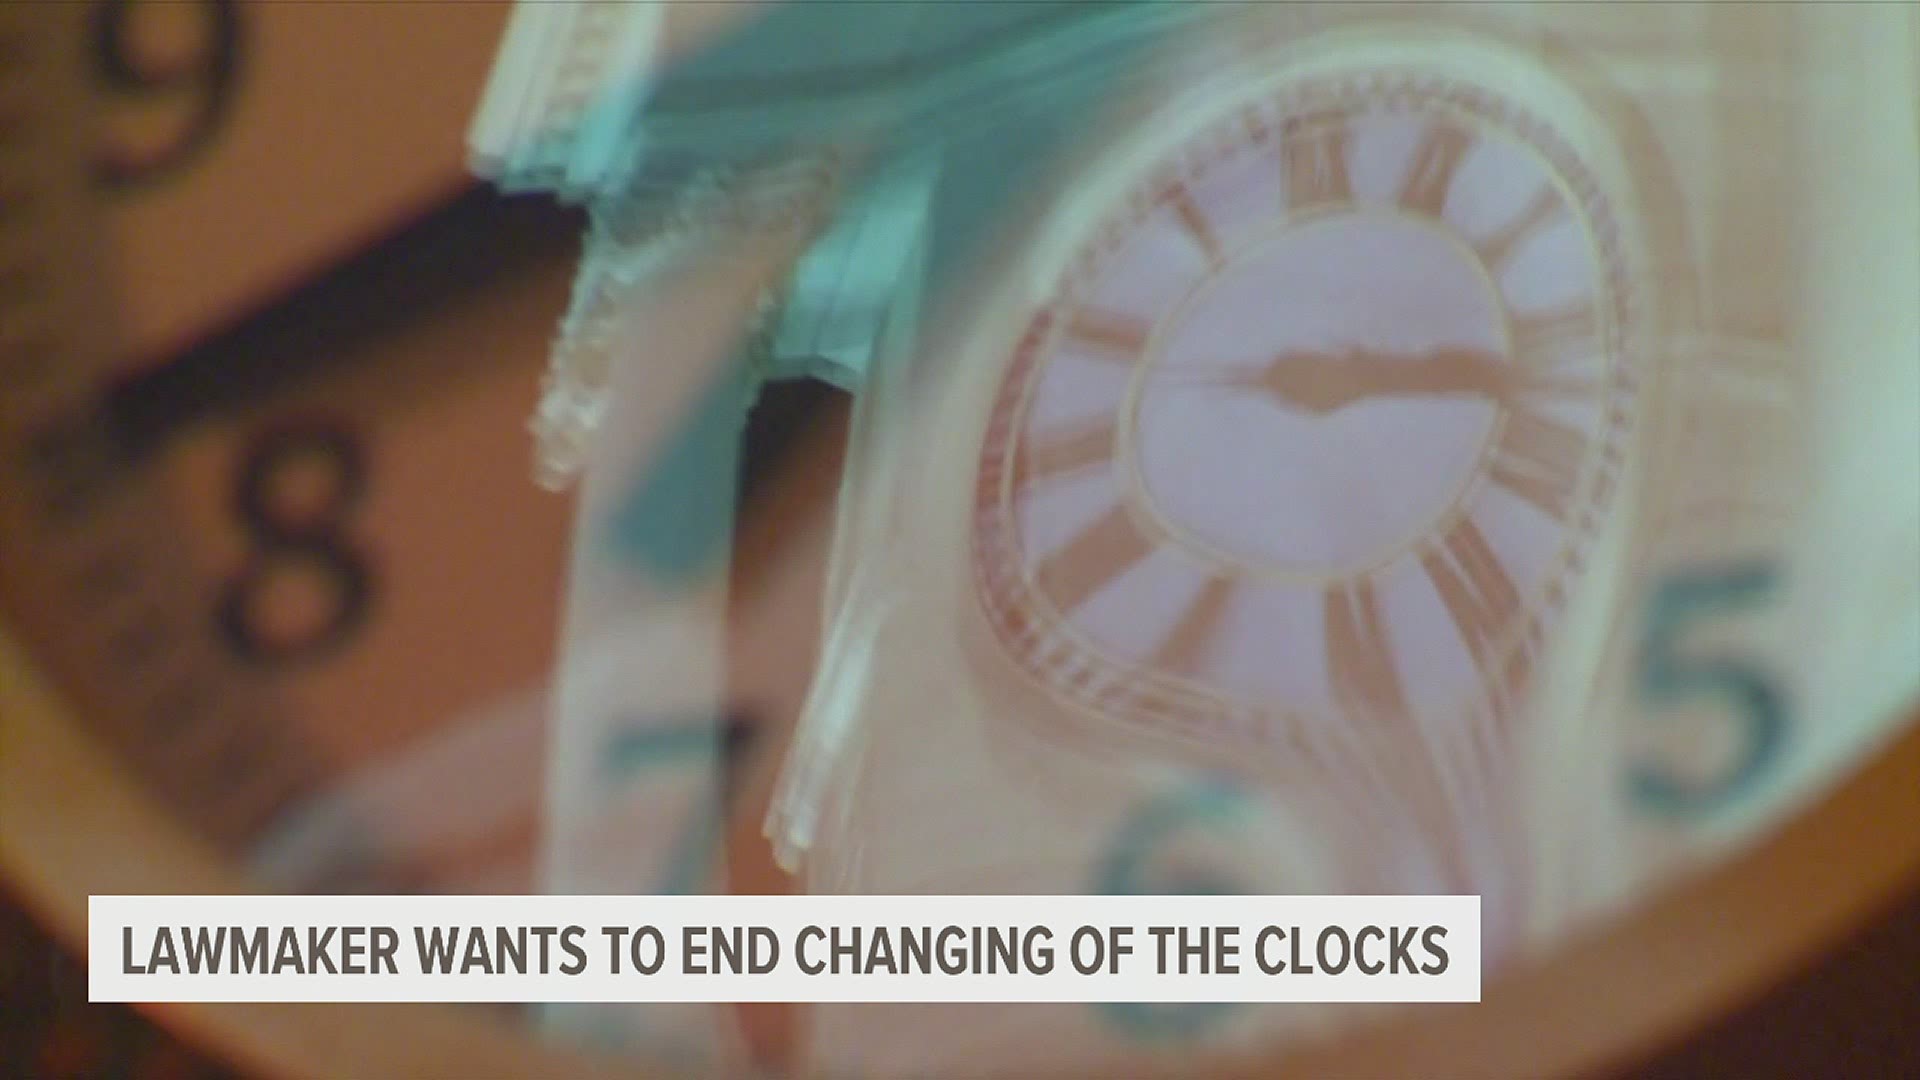 State Sen. Scott Martin plans to introduce legislation  urging Congress to do away with the time saving measure for the entire country.